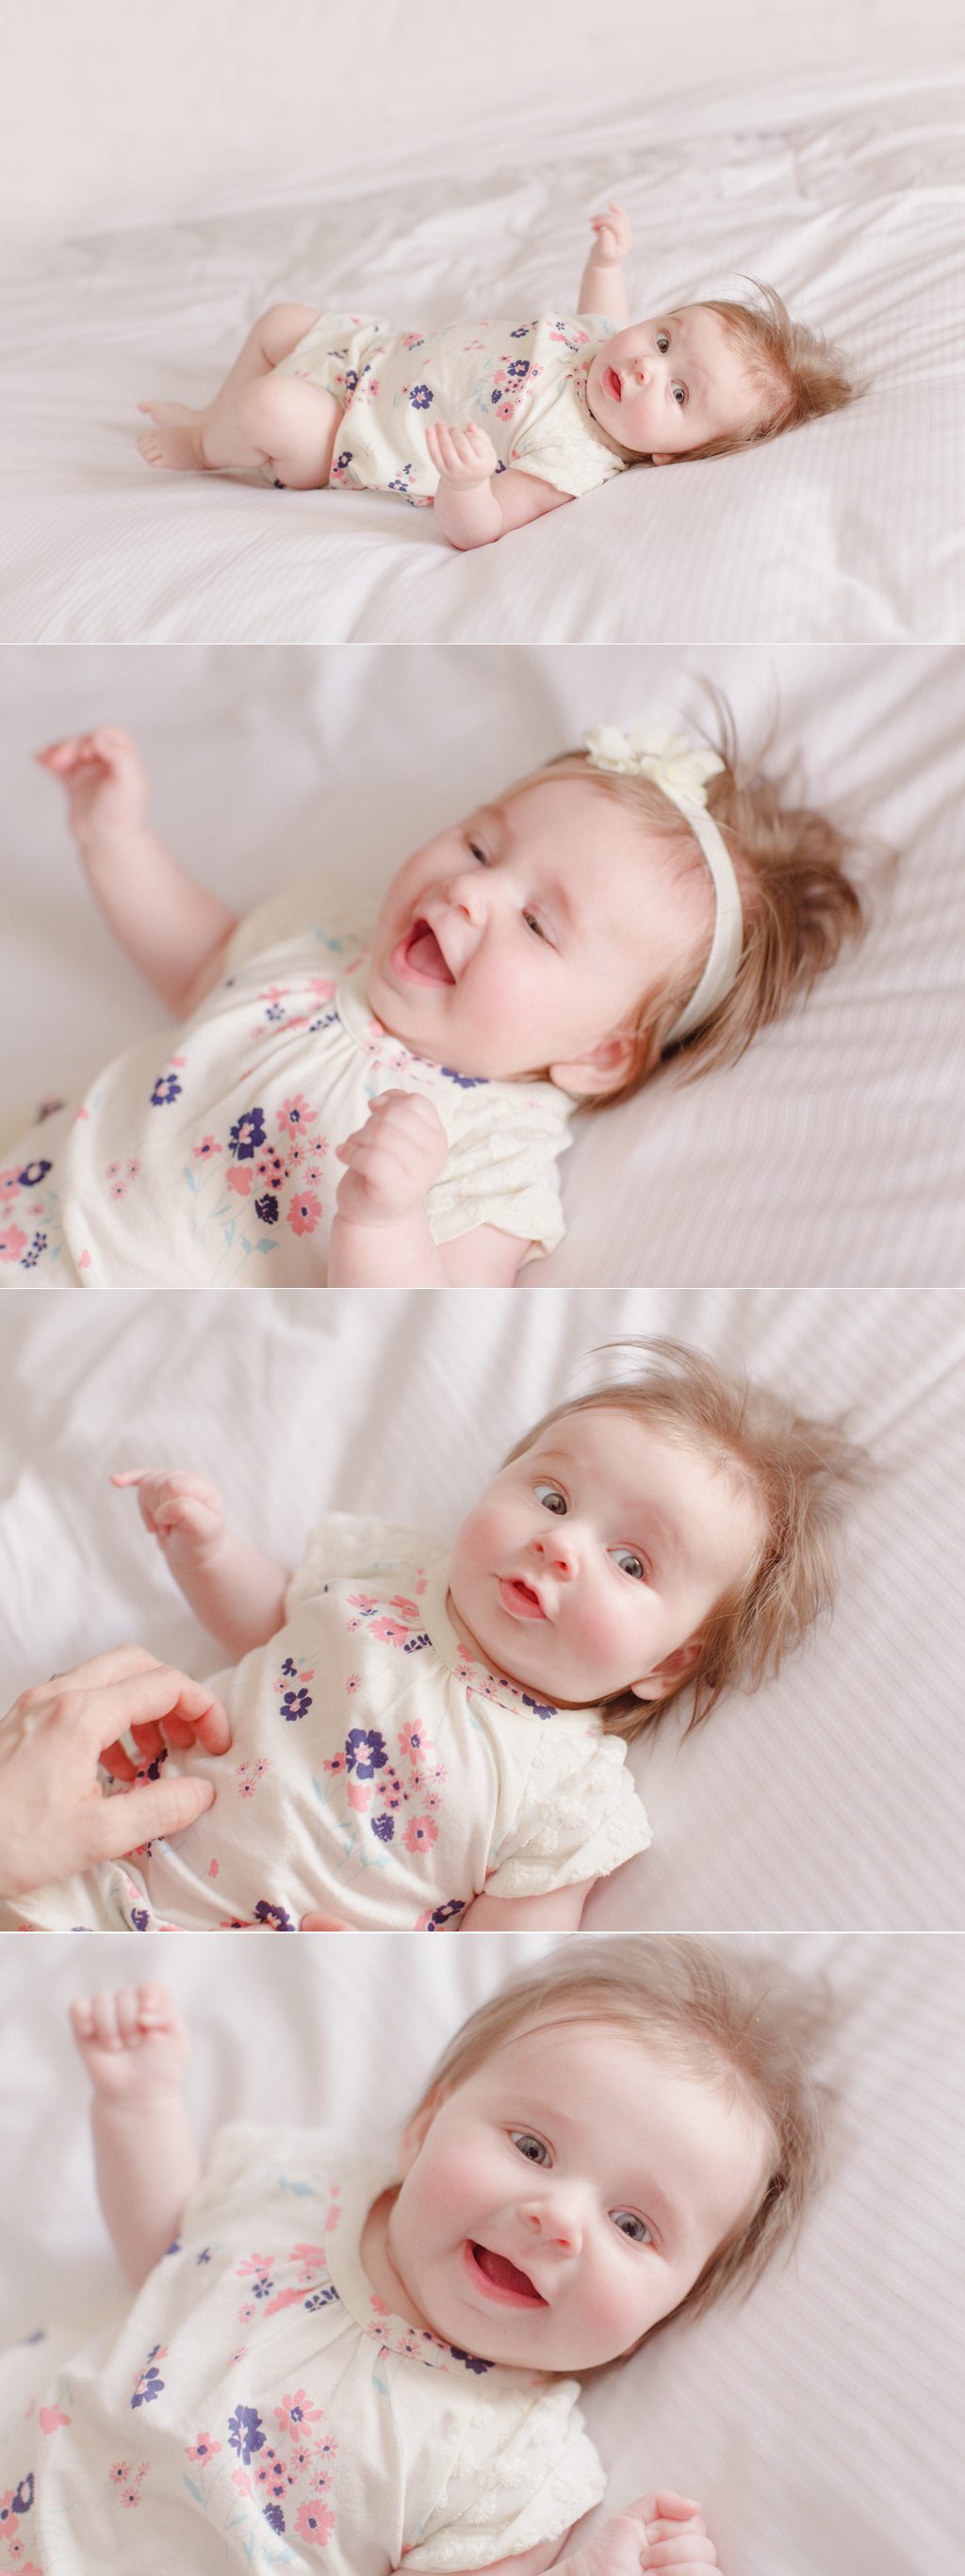 Three month old baby giggling on bed with white linens at a hotel in St. Louis